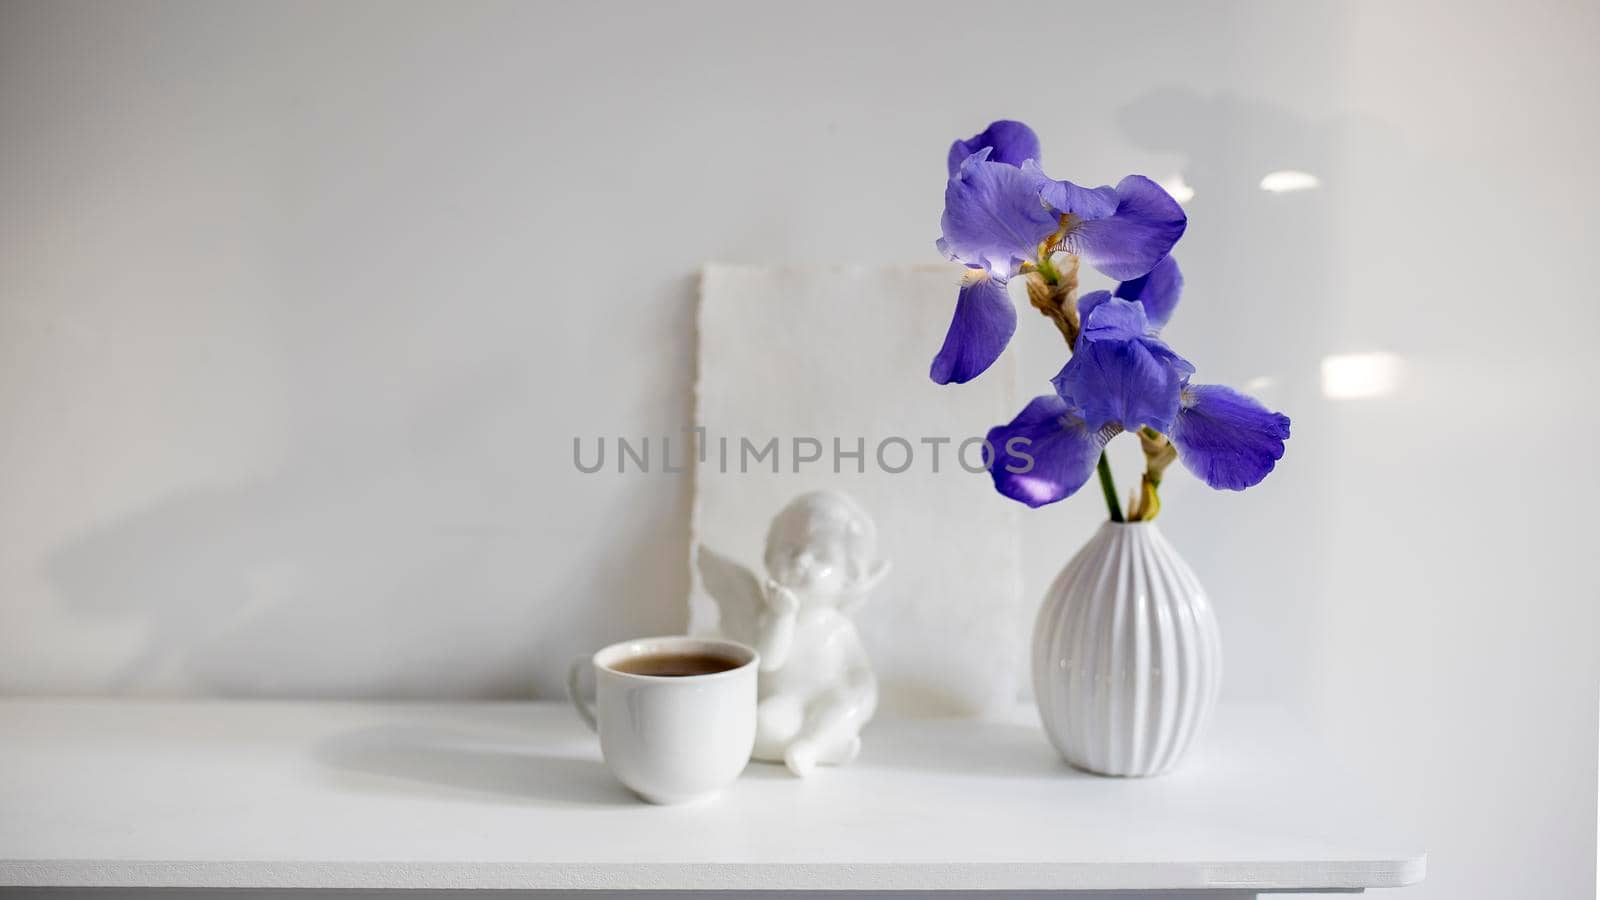 Blue iris in a corrugated vase with a piece of craft paper on a white table. Figurine of the angel. Cup of tea. Place for text